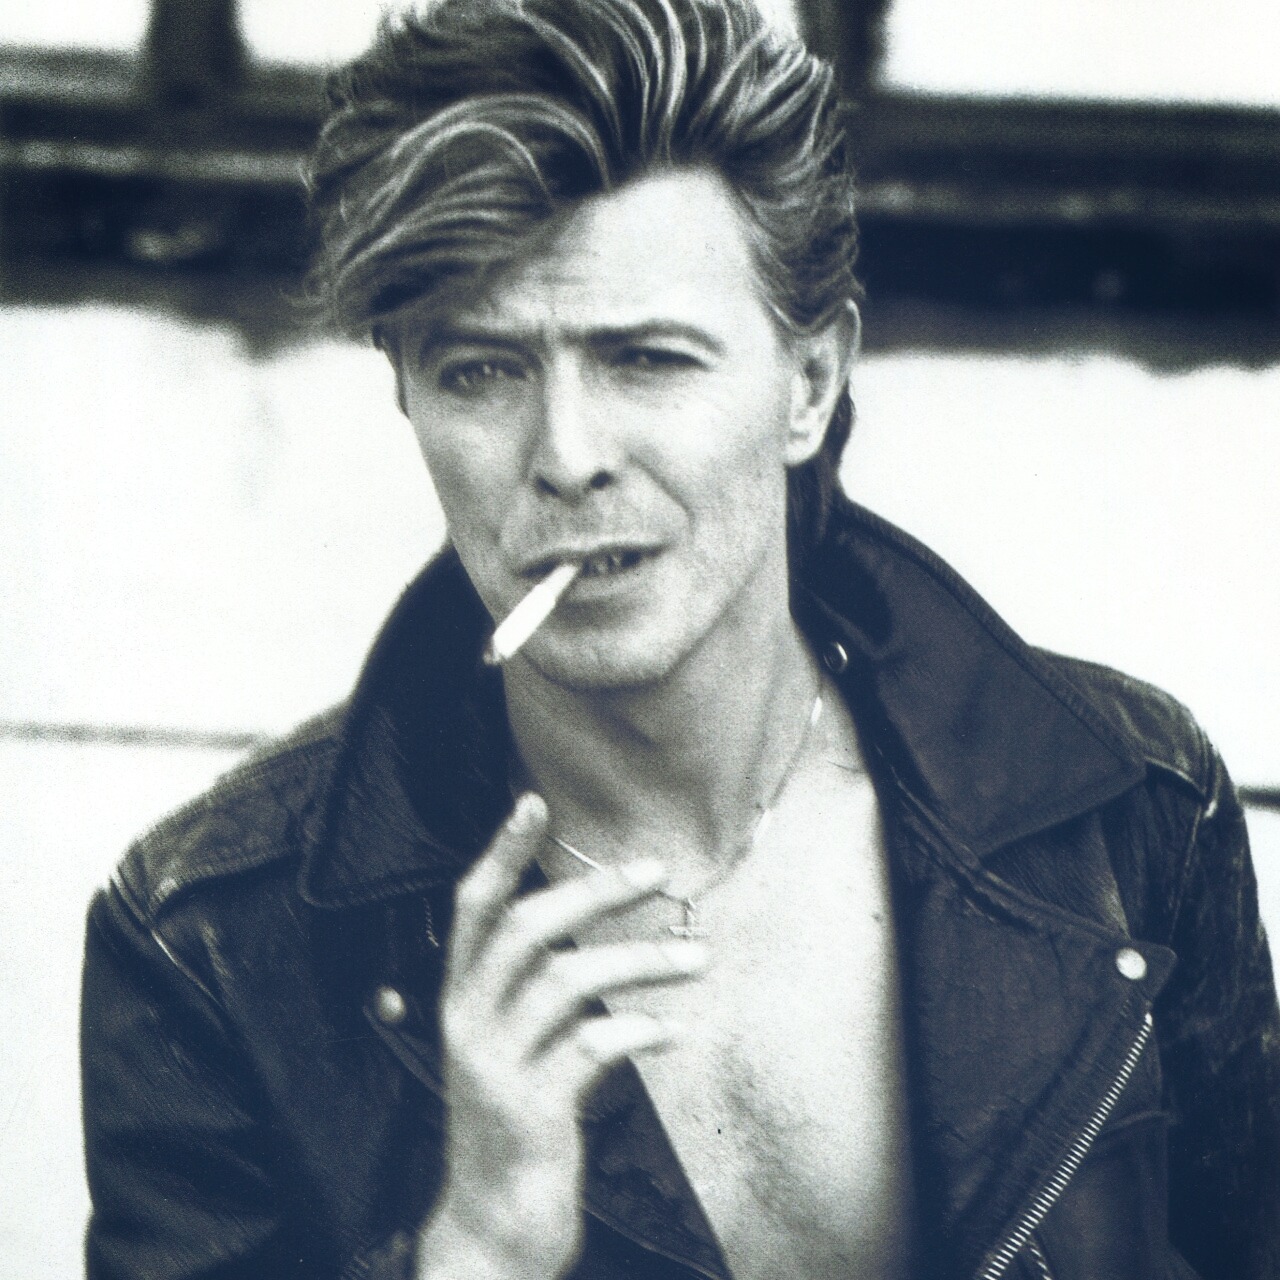 Dreams Unwind Loves A State Of Mind Rest In Peace David Bowie January 8 1947 1428